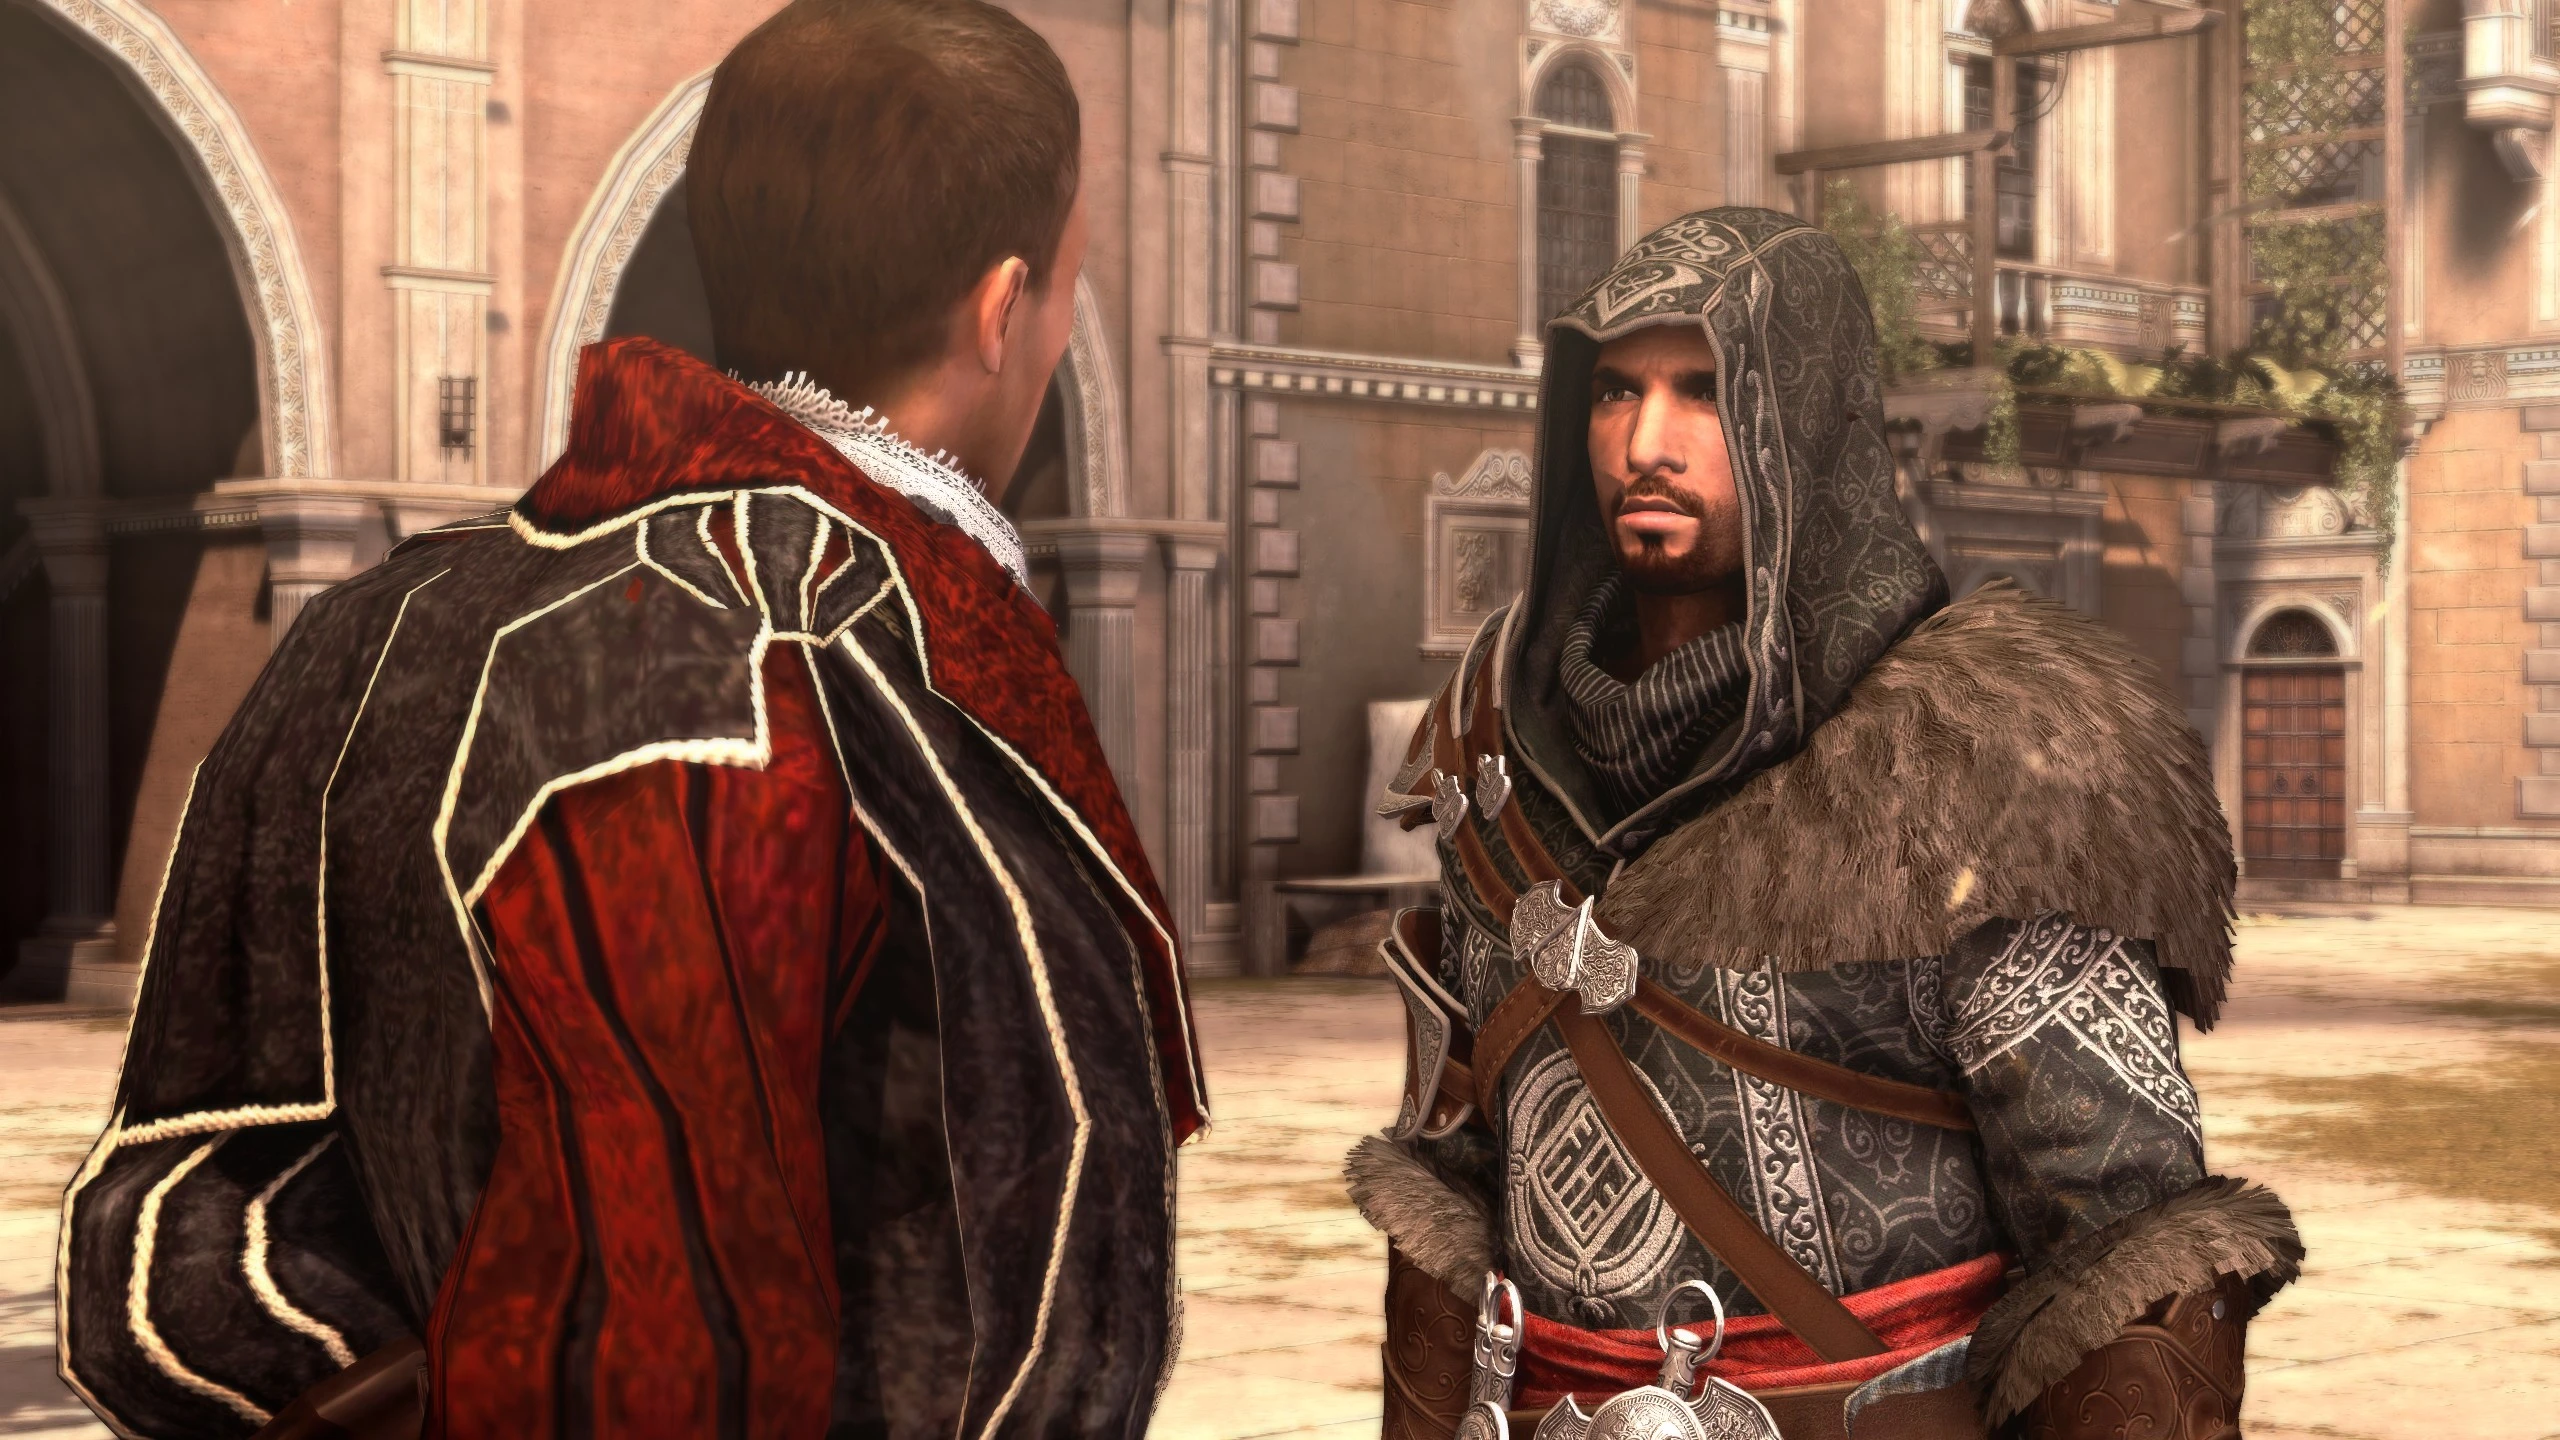 Ezio's Revelations Outfits at Assassin's Creed: Brotherhood Nexus - Mods  and community